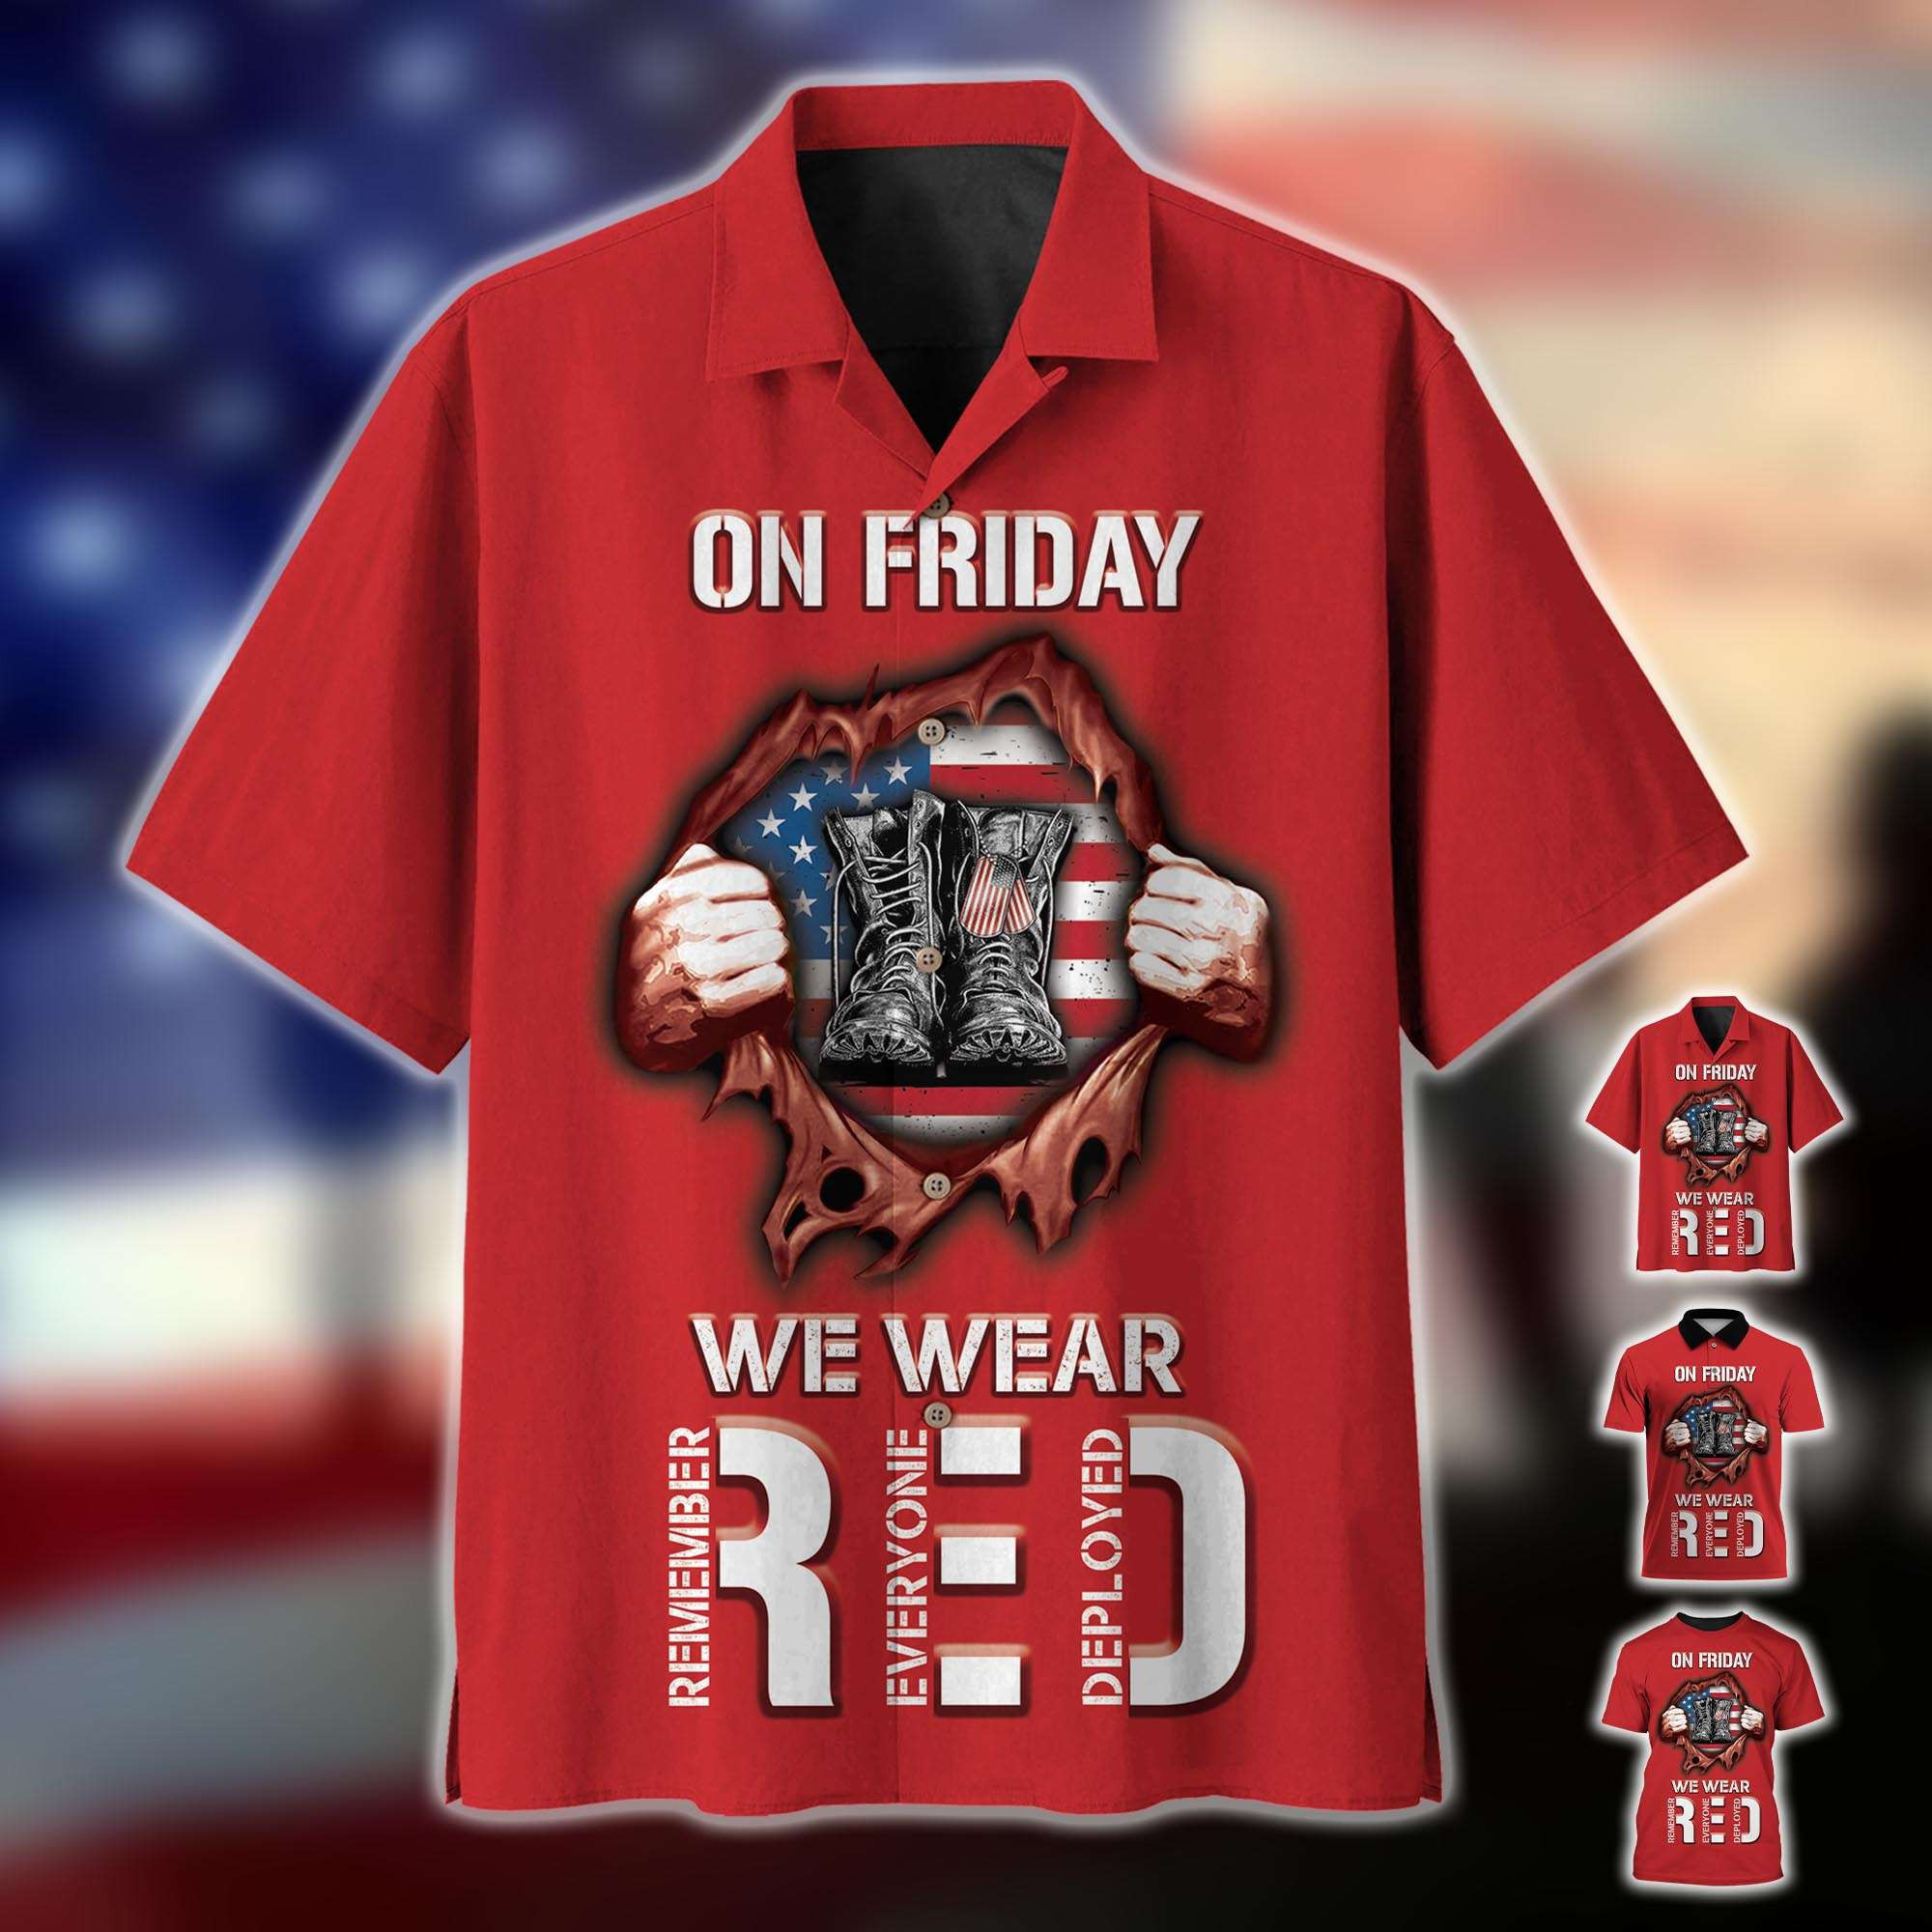 On friday we wear Red Polo Shirt YL97.220401